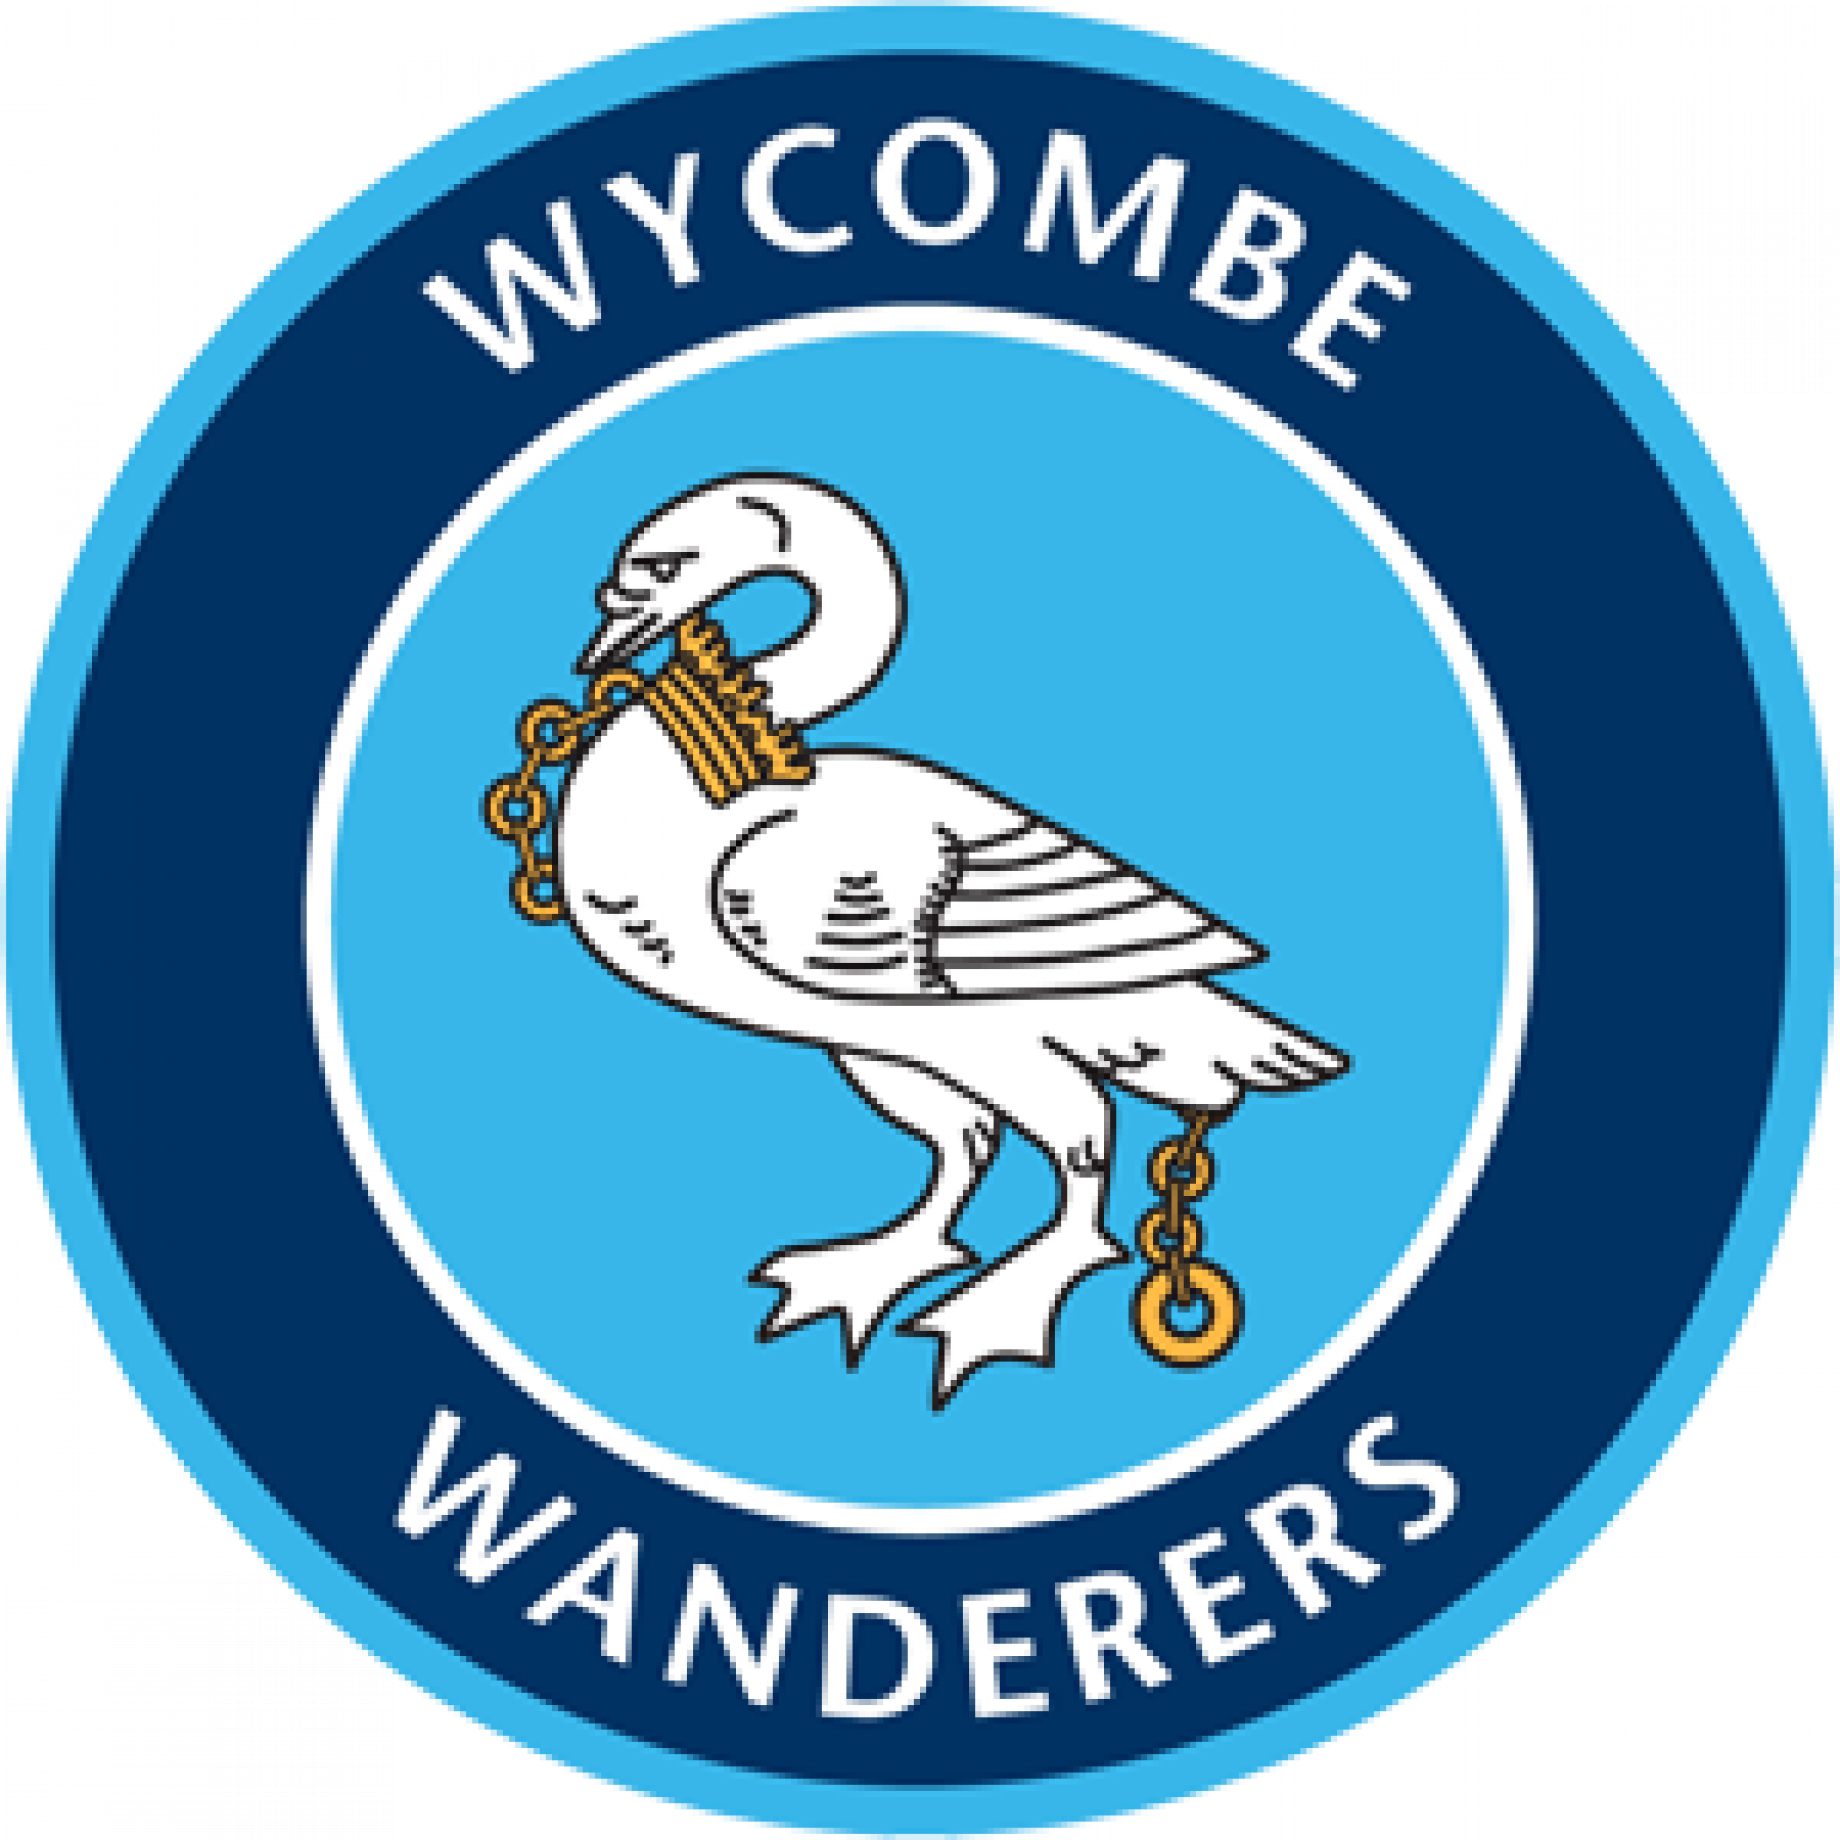 Wycombe_Wanderers.png